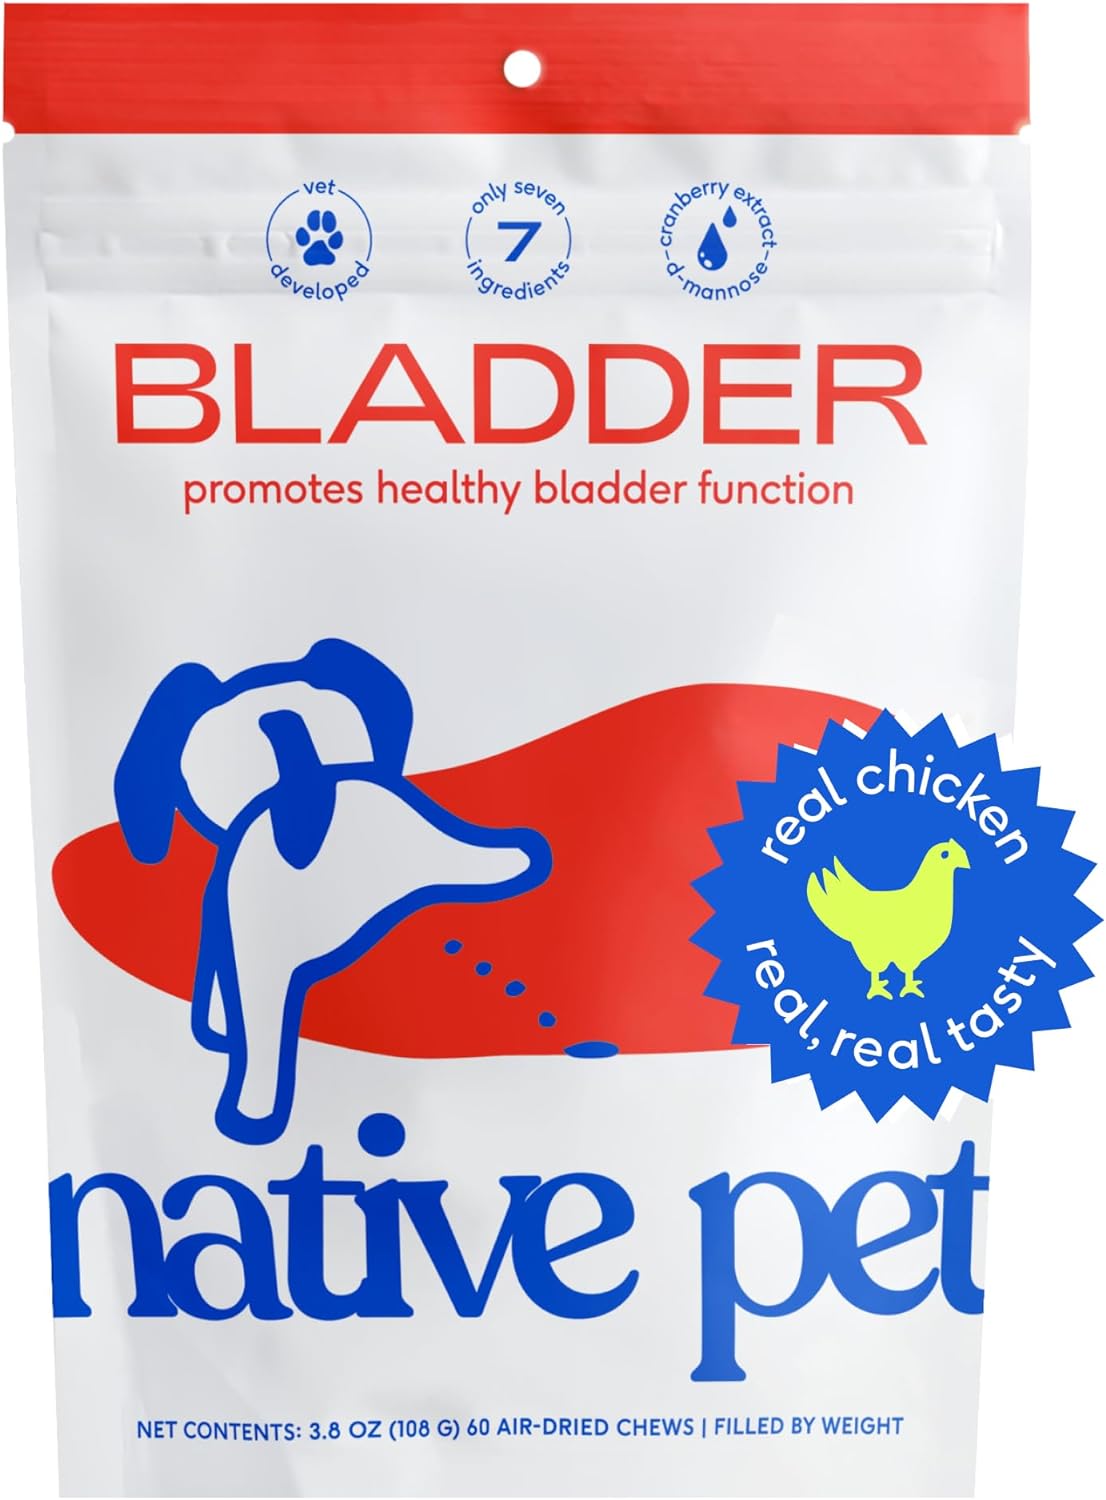 Native Pet Dog UTI Treatment - Chicken Chews for Dogs and Cat UTI - Bladder Control for Dogs for Urinary Tract Infection - UTI Medicine for Dogs - Includes Cranberry - 60 Chews